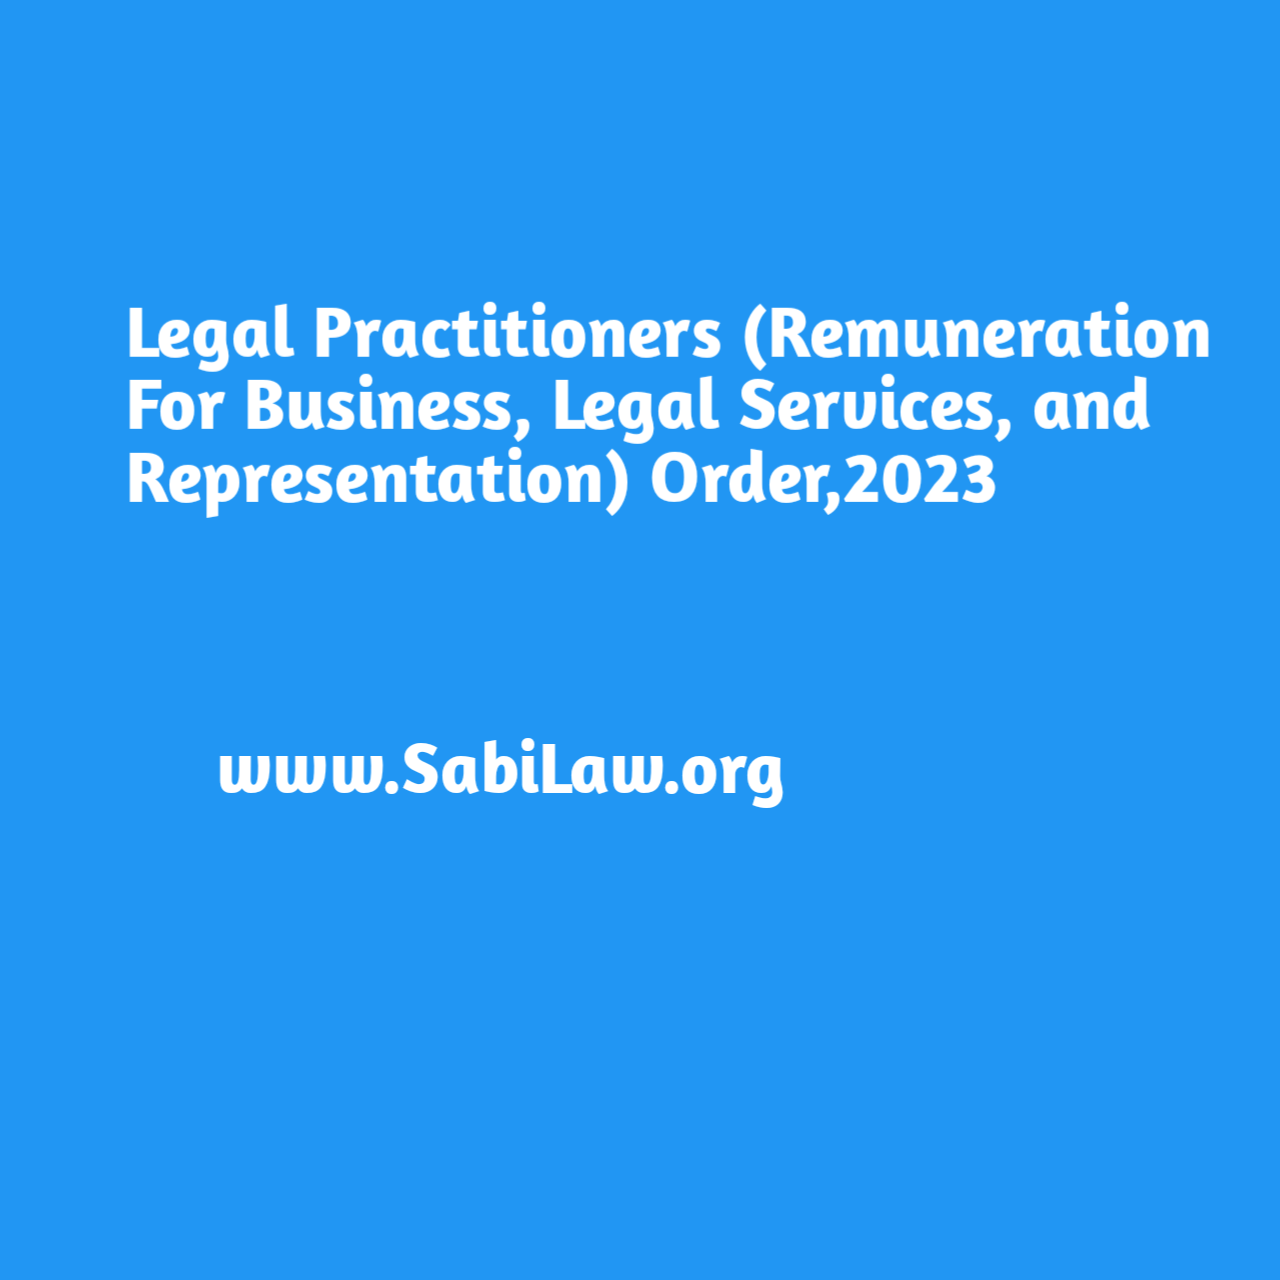 Legal Practitioners (Remuneration for Business, Legal Services, And Representation) Order,2023